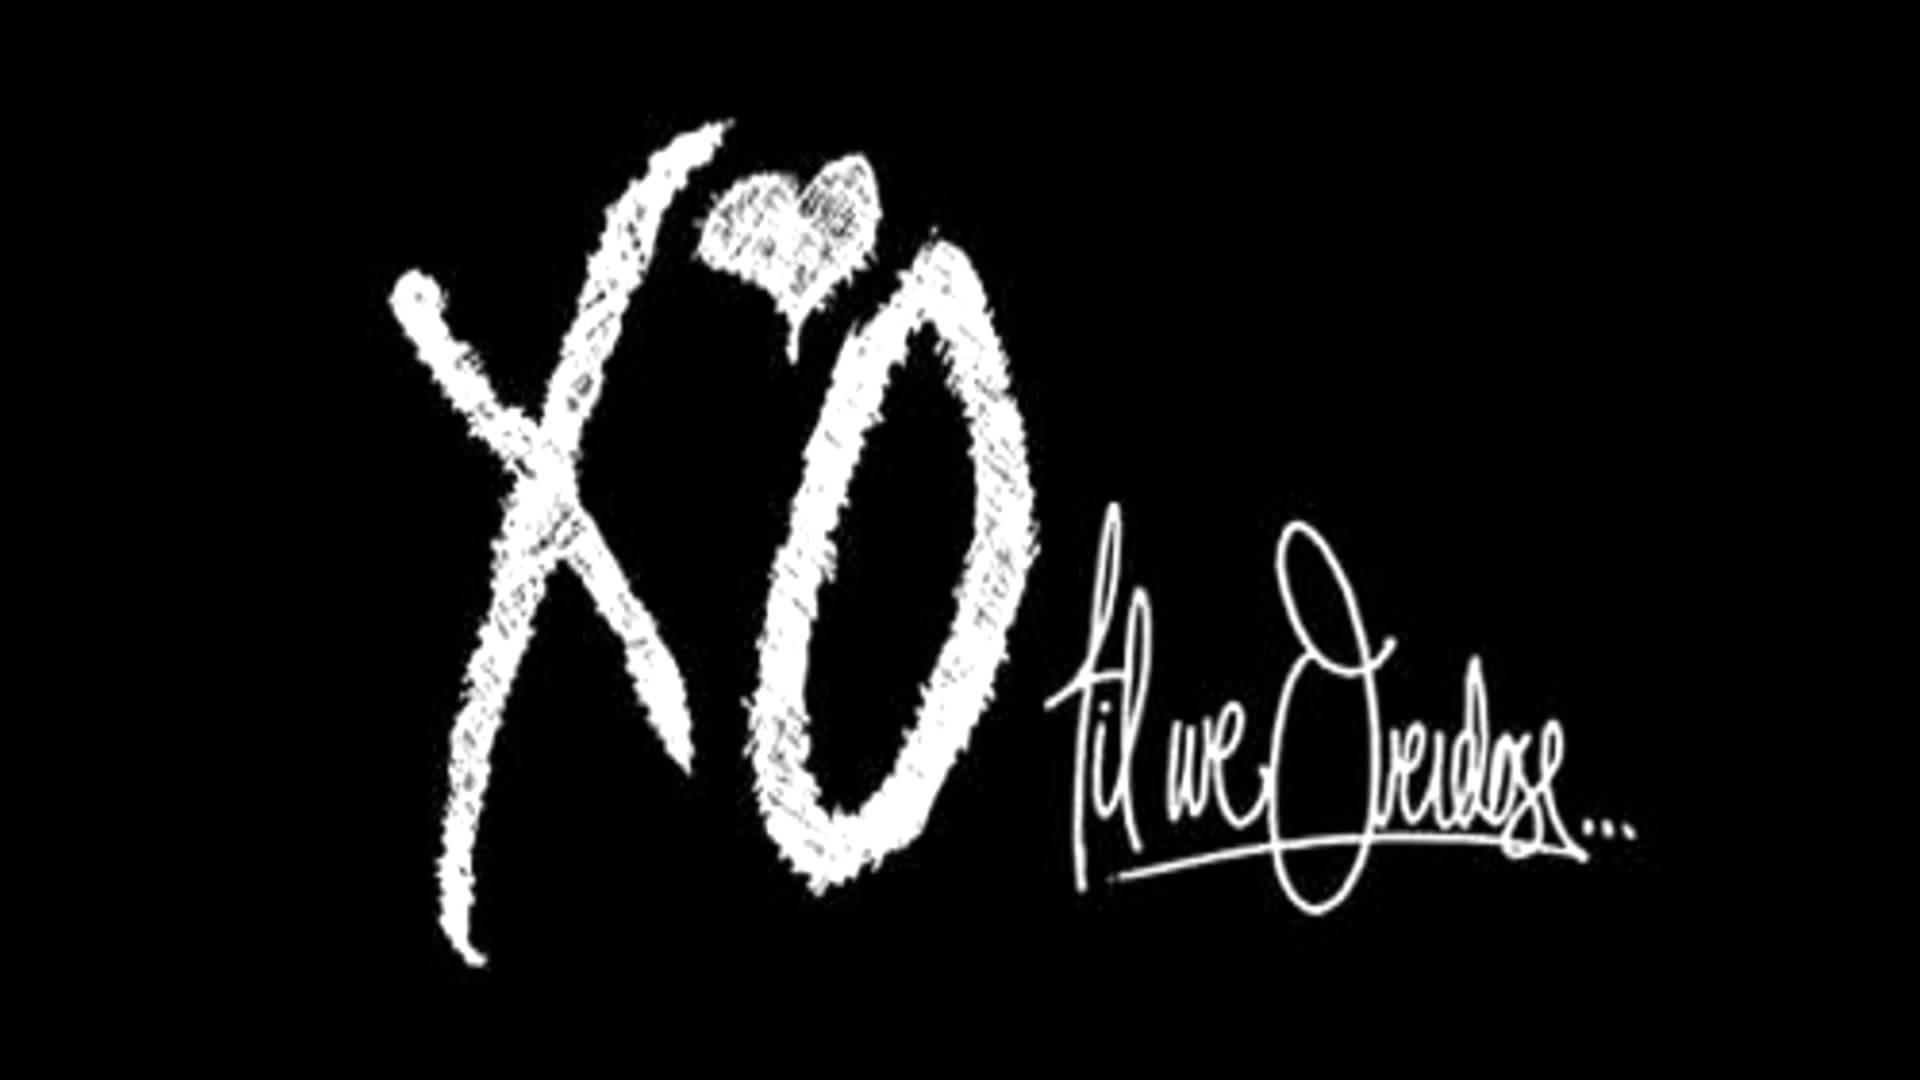 The Weeknd Xo Wallpaper Clearance Outlet, Save 41% | jlcatj.gob.mx